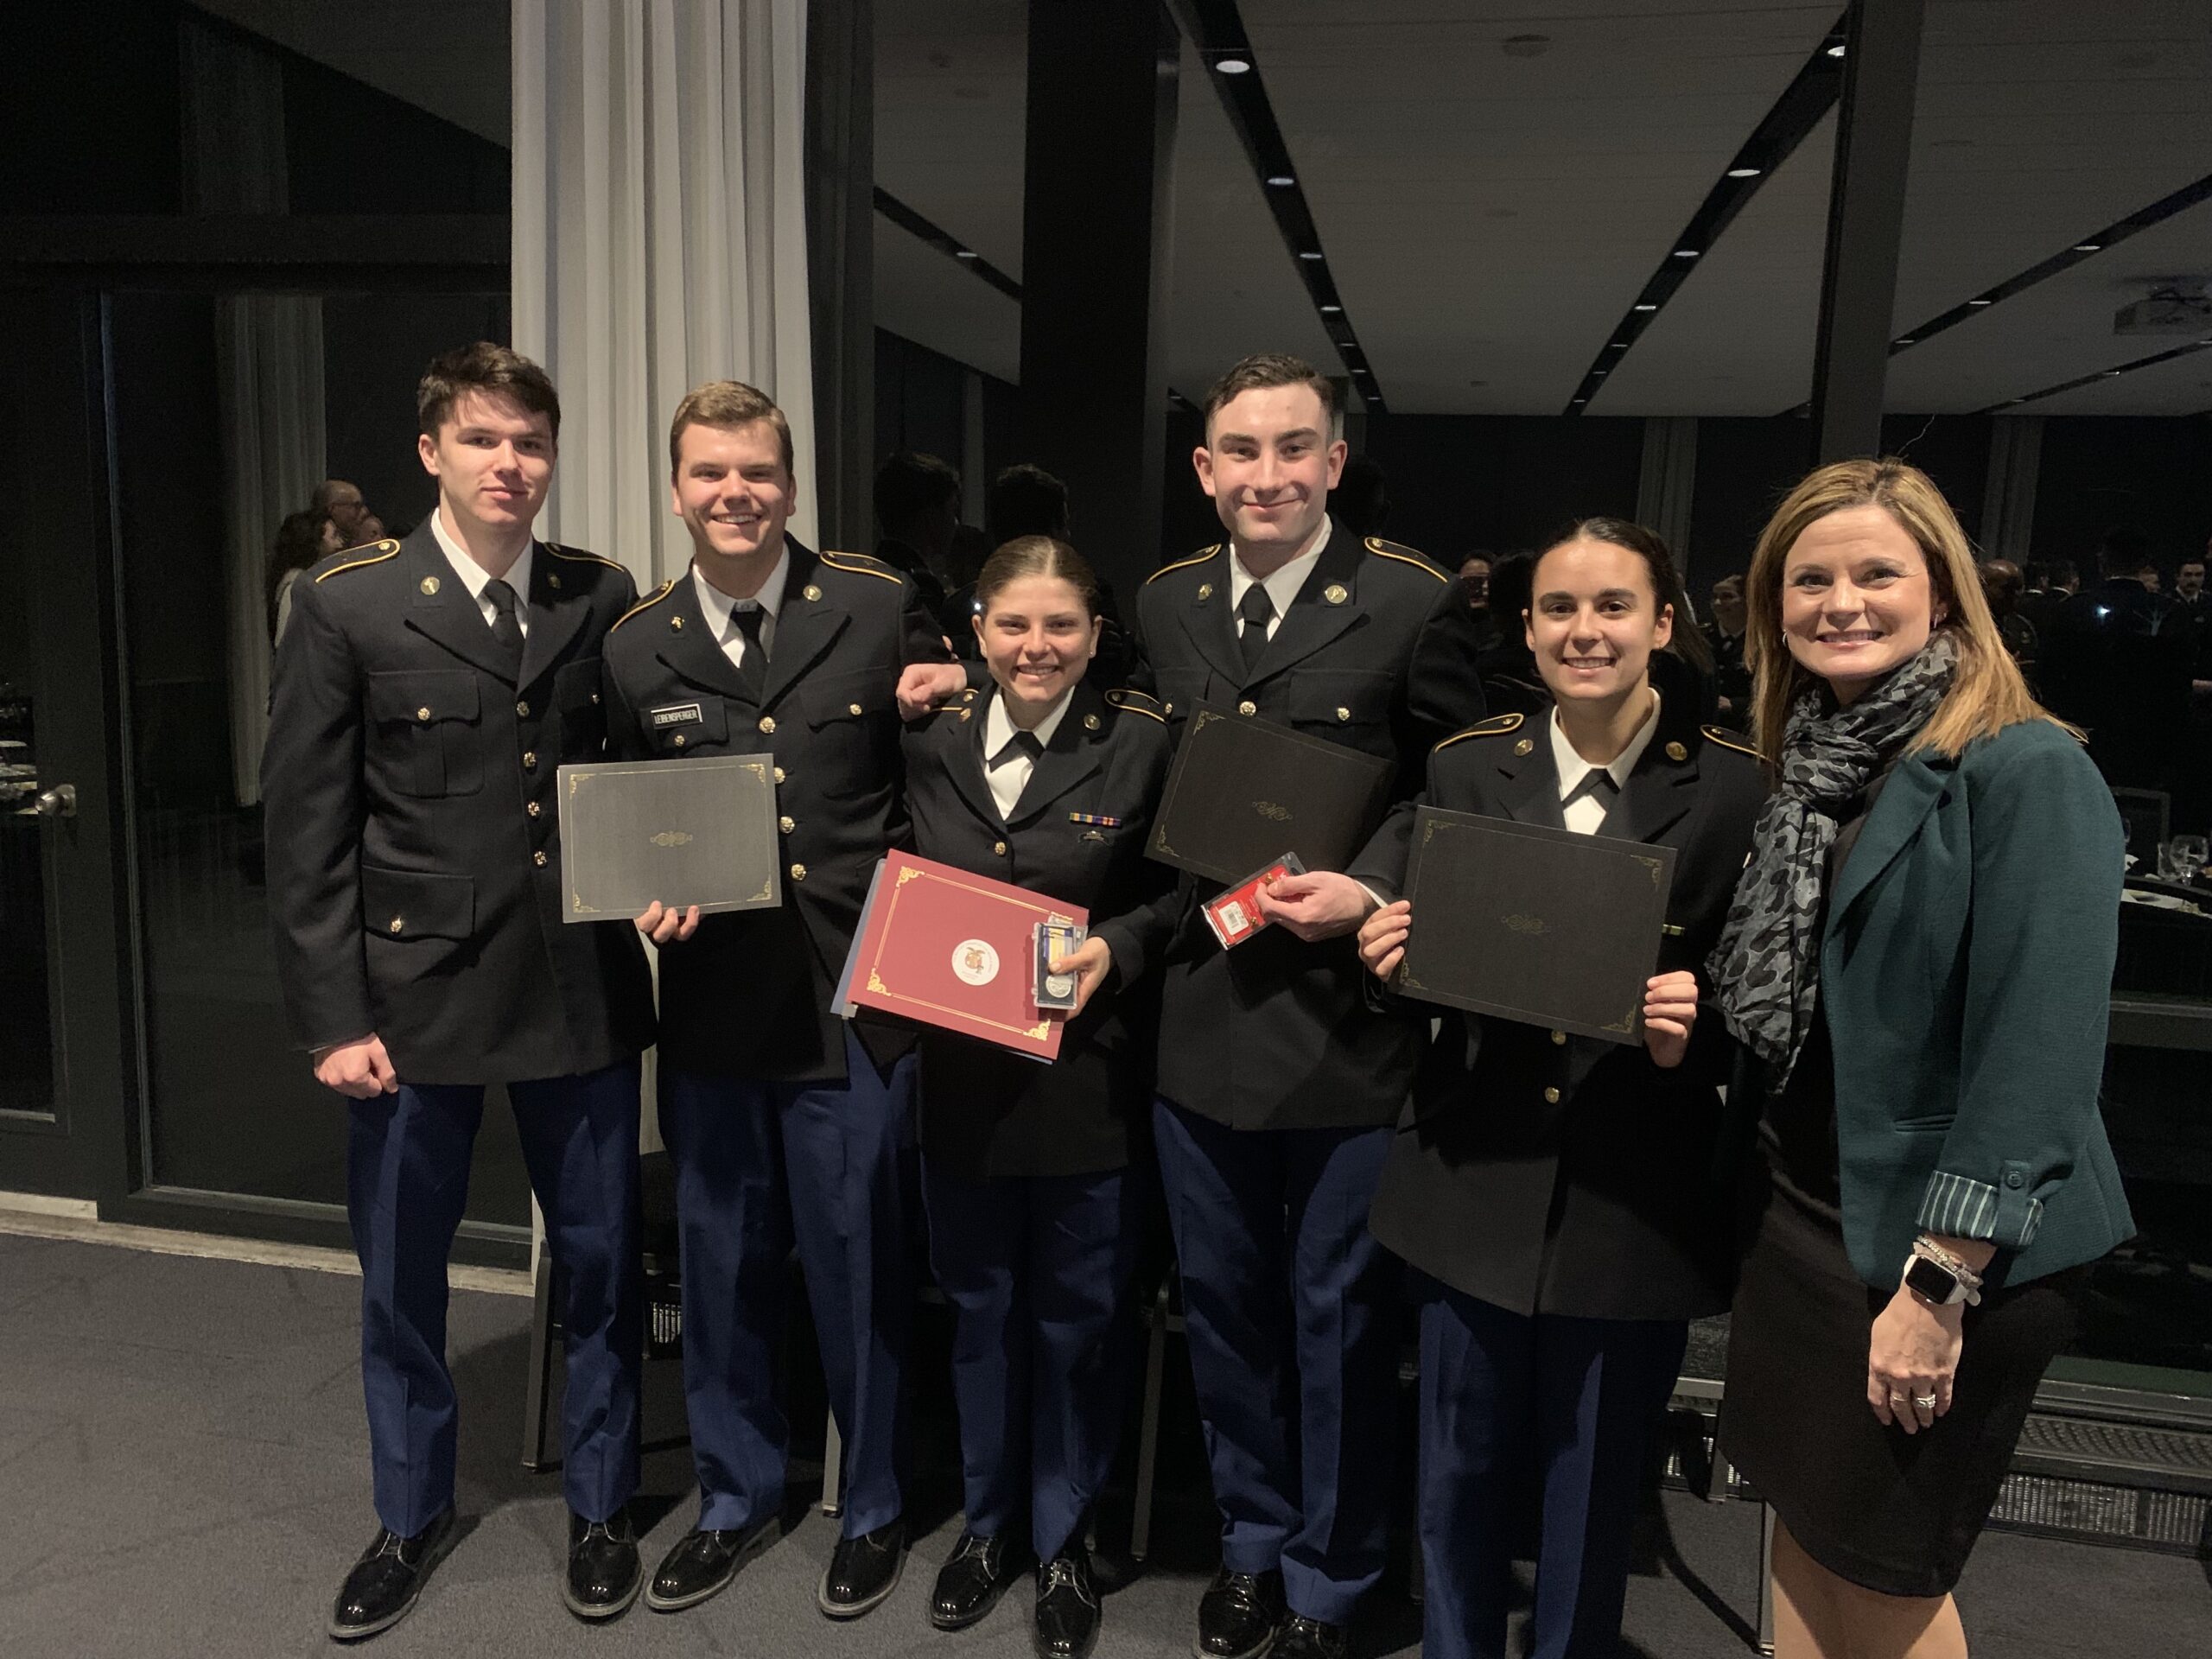 Lafayette students honored at the 2023 ROTC Steel Battalion Awards (from left to right): Raymond Kerrison ‘26, Brandon Leibensperger ‘24, Daniela Spera ‘26, John Freeman ‘26, Samantha Becker ‘25, Lafayette Executive Vice President for Finance and Business Administration Audra Kahr.